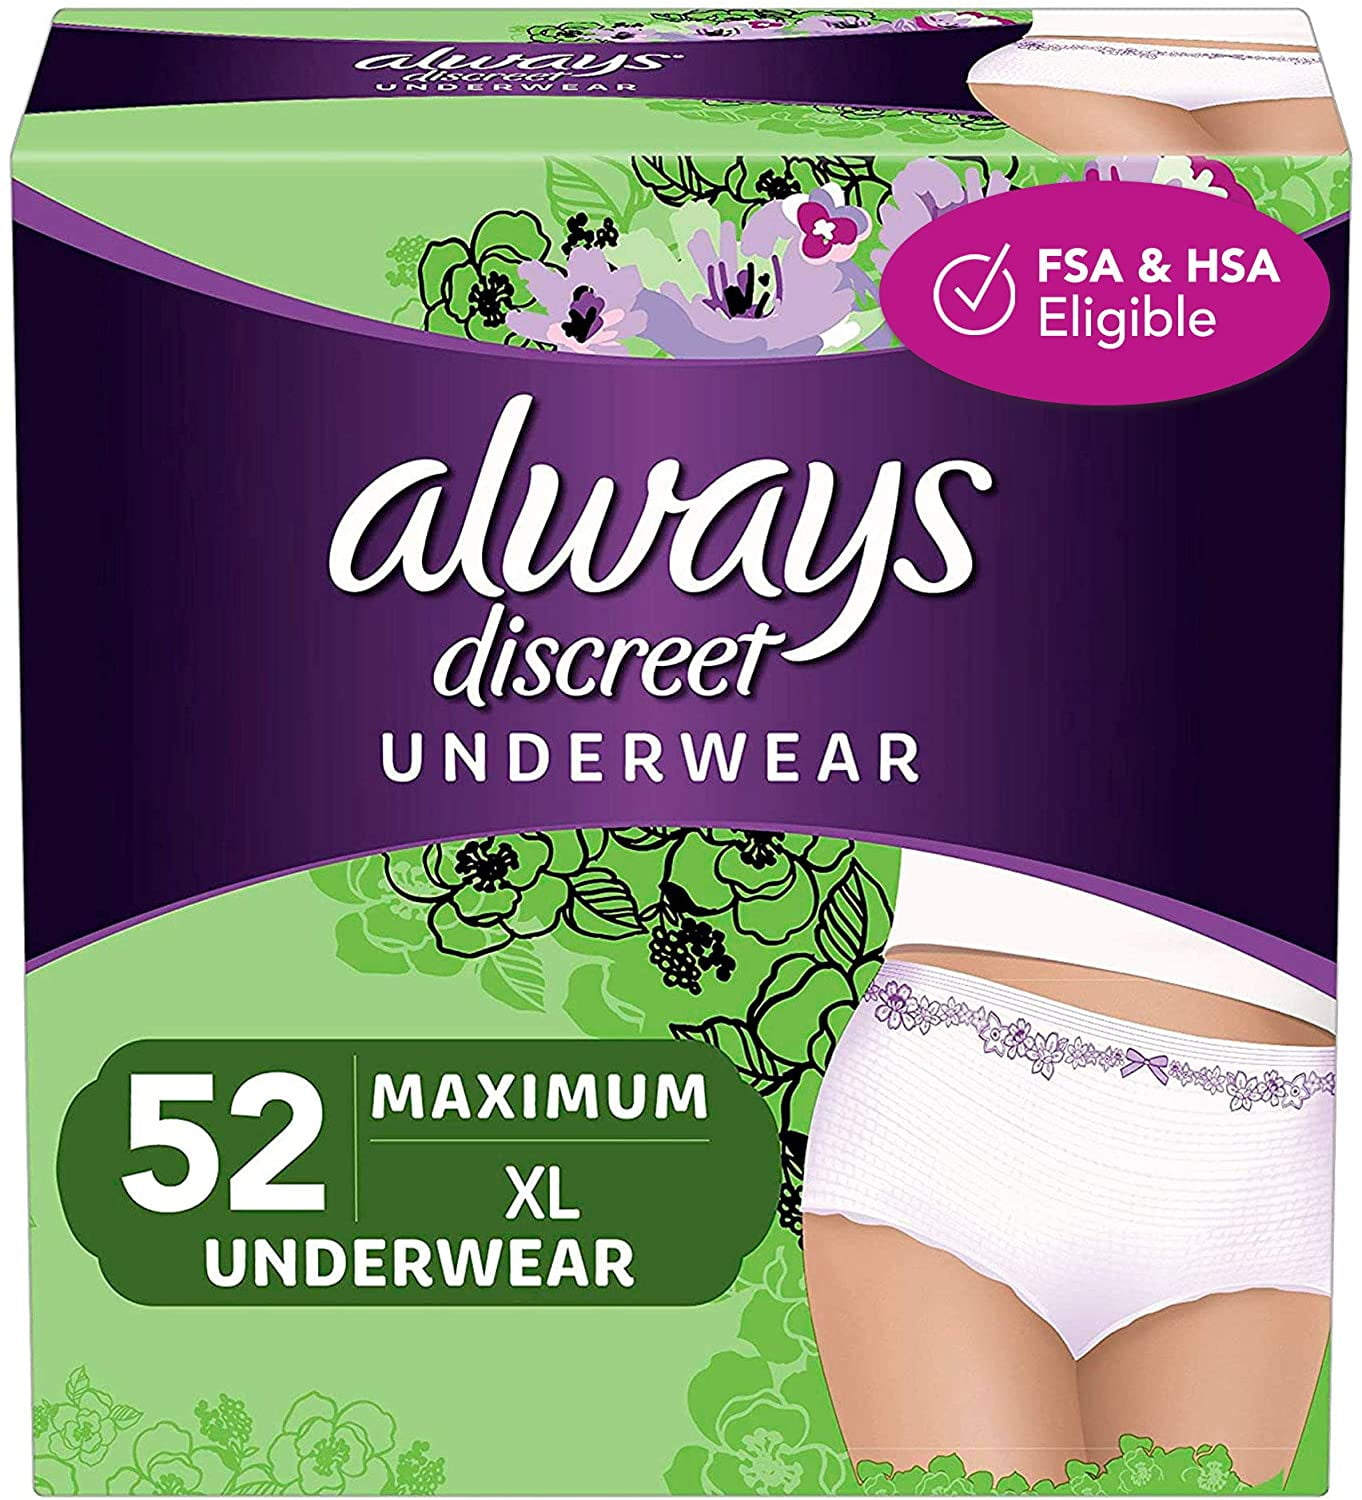 54 Count Assurance Incontinence& Disposable Underwear For Women Adult  Diaper 2XL - Helia Beer Co